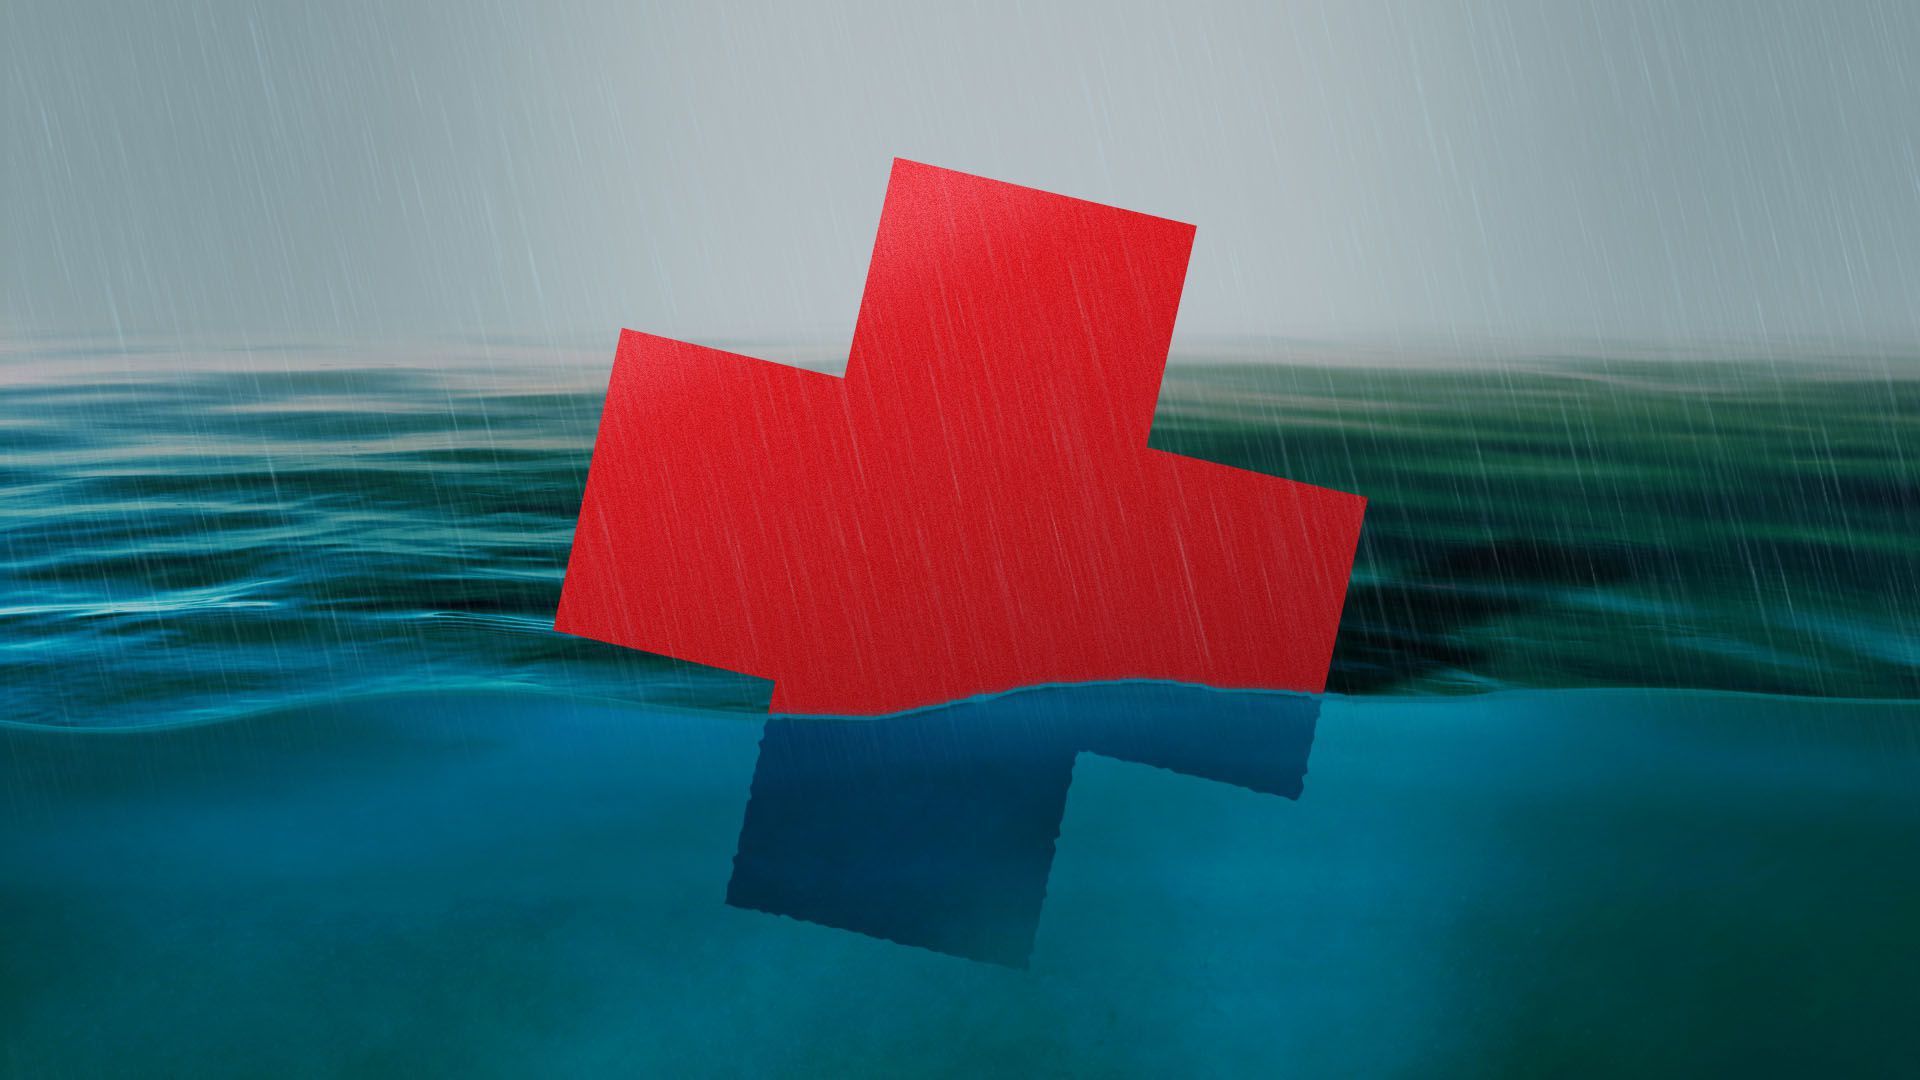 A medical cross symbol submerged in water